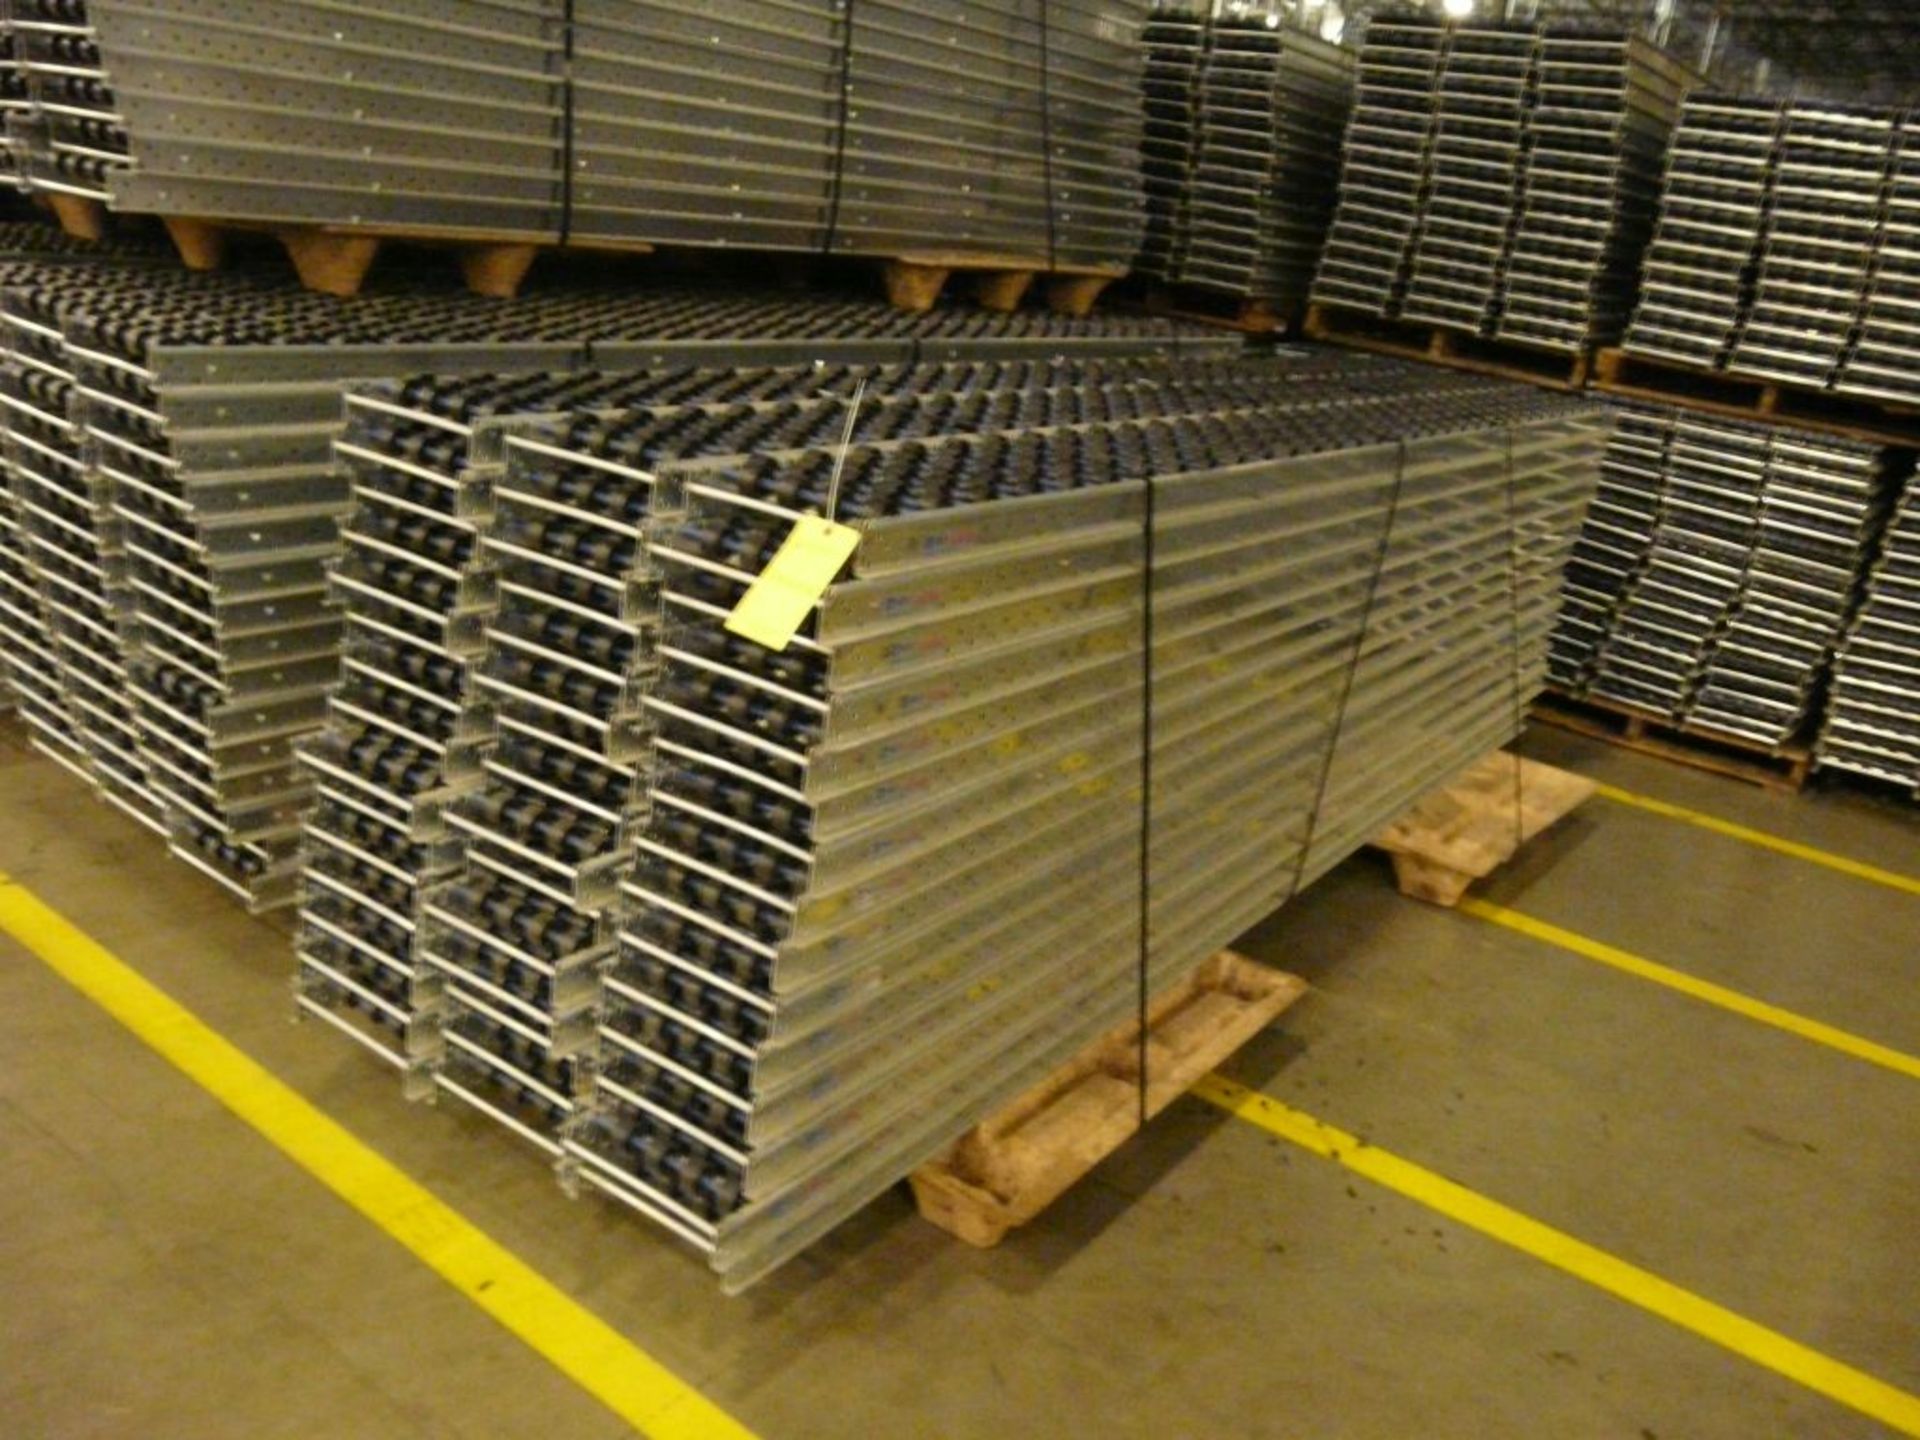 Lot of (90) SpanTrack Wheelbed Carton Flow Conveyors - 11.5'L x 11"W; Tag: 223554 - $30 Lot